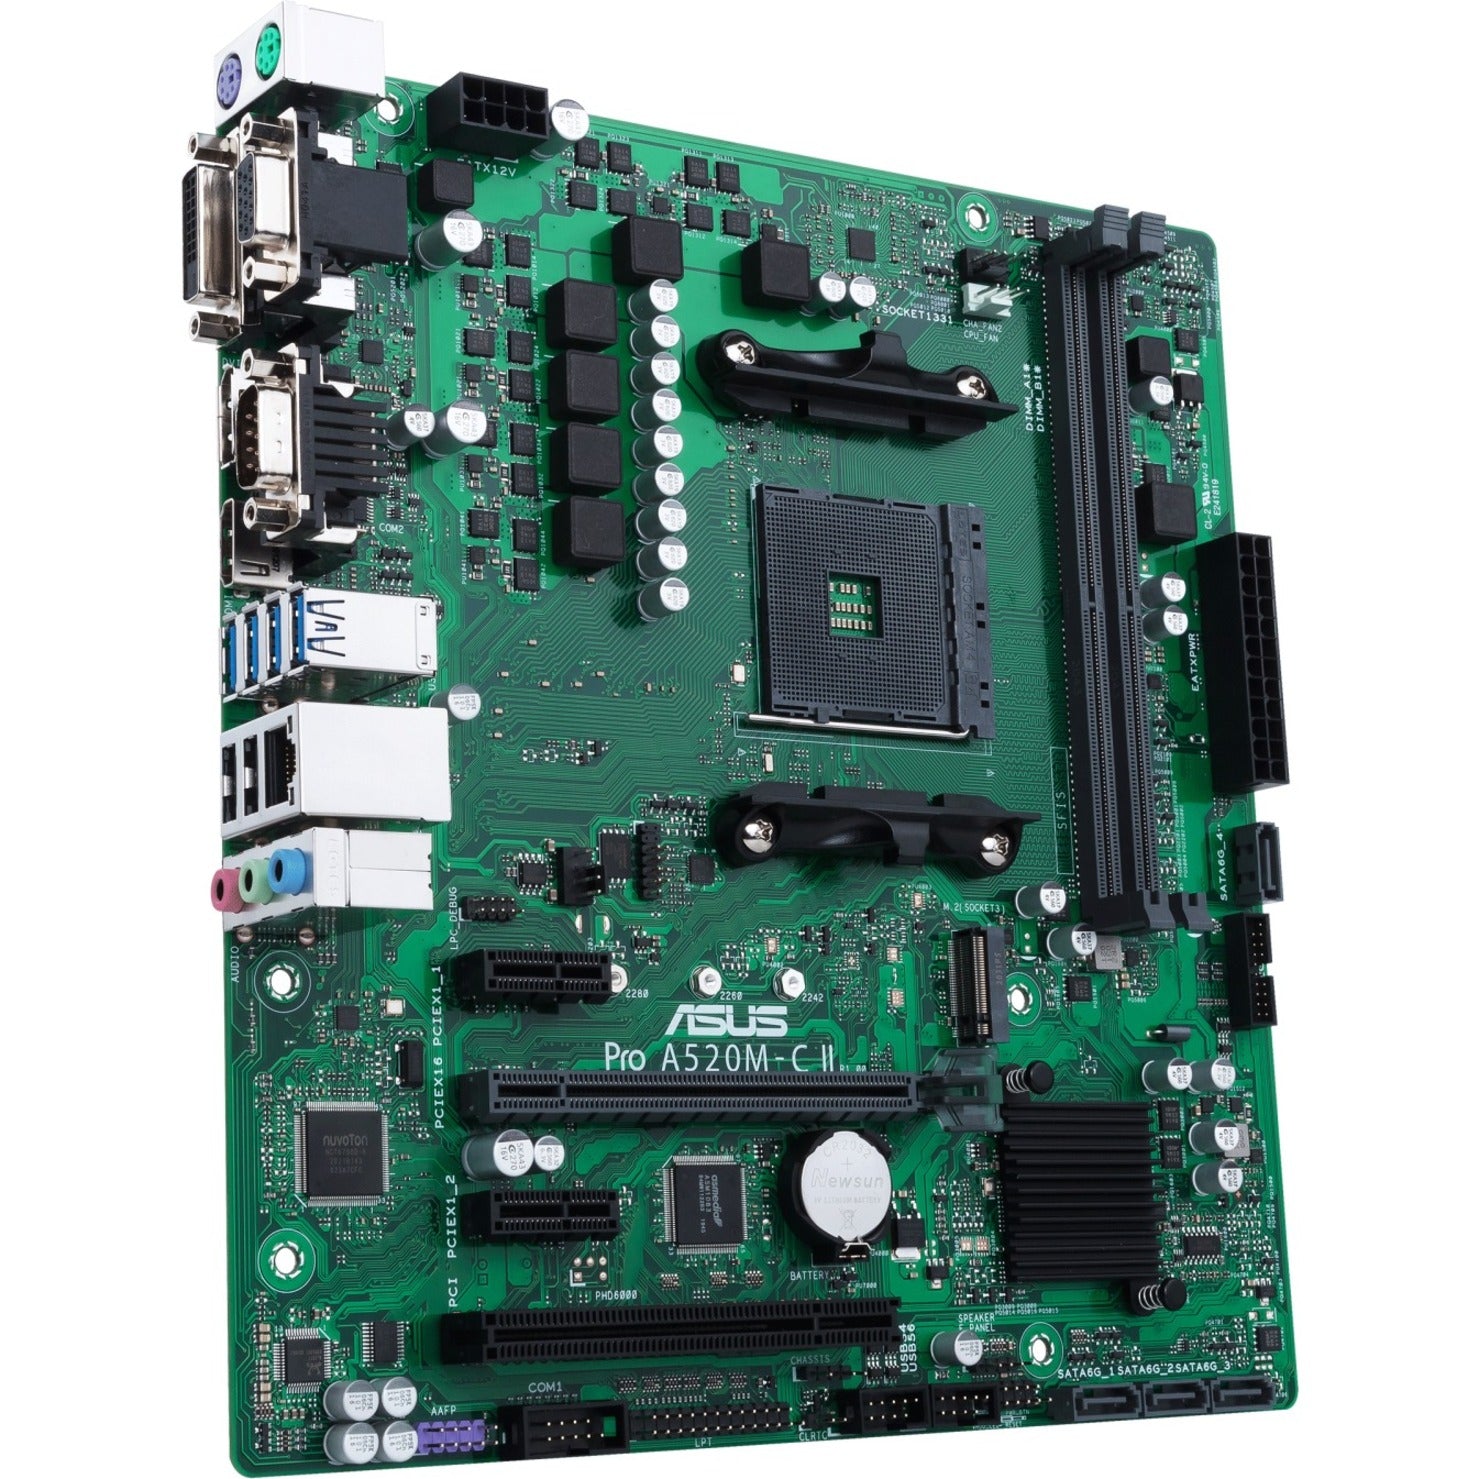 ASUS Desktop Motherboard PRO A520M-C II/CSM, Powered by AMD 3rd Gen Ryzen Processors, Enhanced Longevity, Security, Reliability, and Manageability